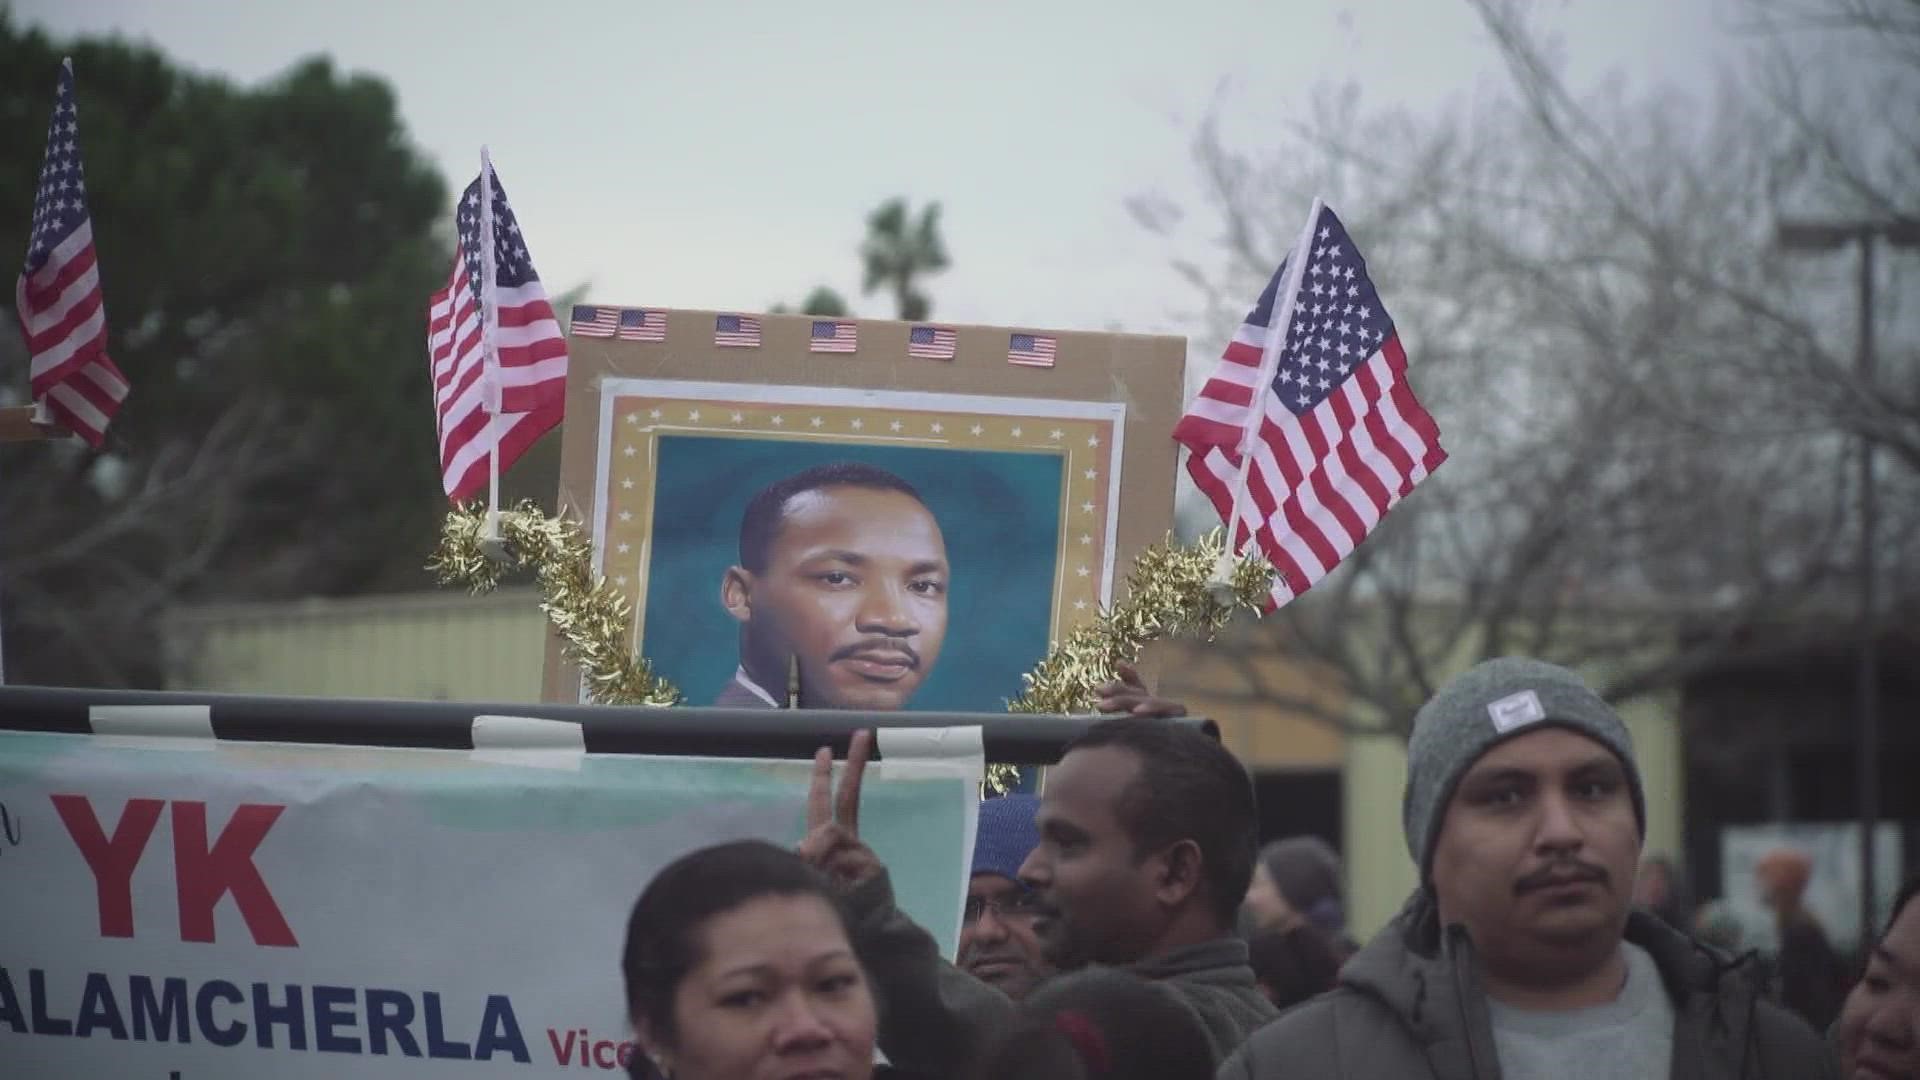 In Sacramento's 42nd annual March For The Dream, the group MLK365 wanted to honor Dr. King and invite community members to join in the celebration.